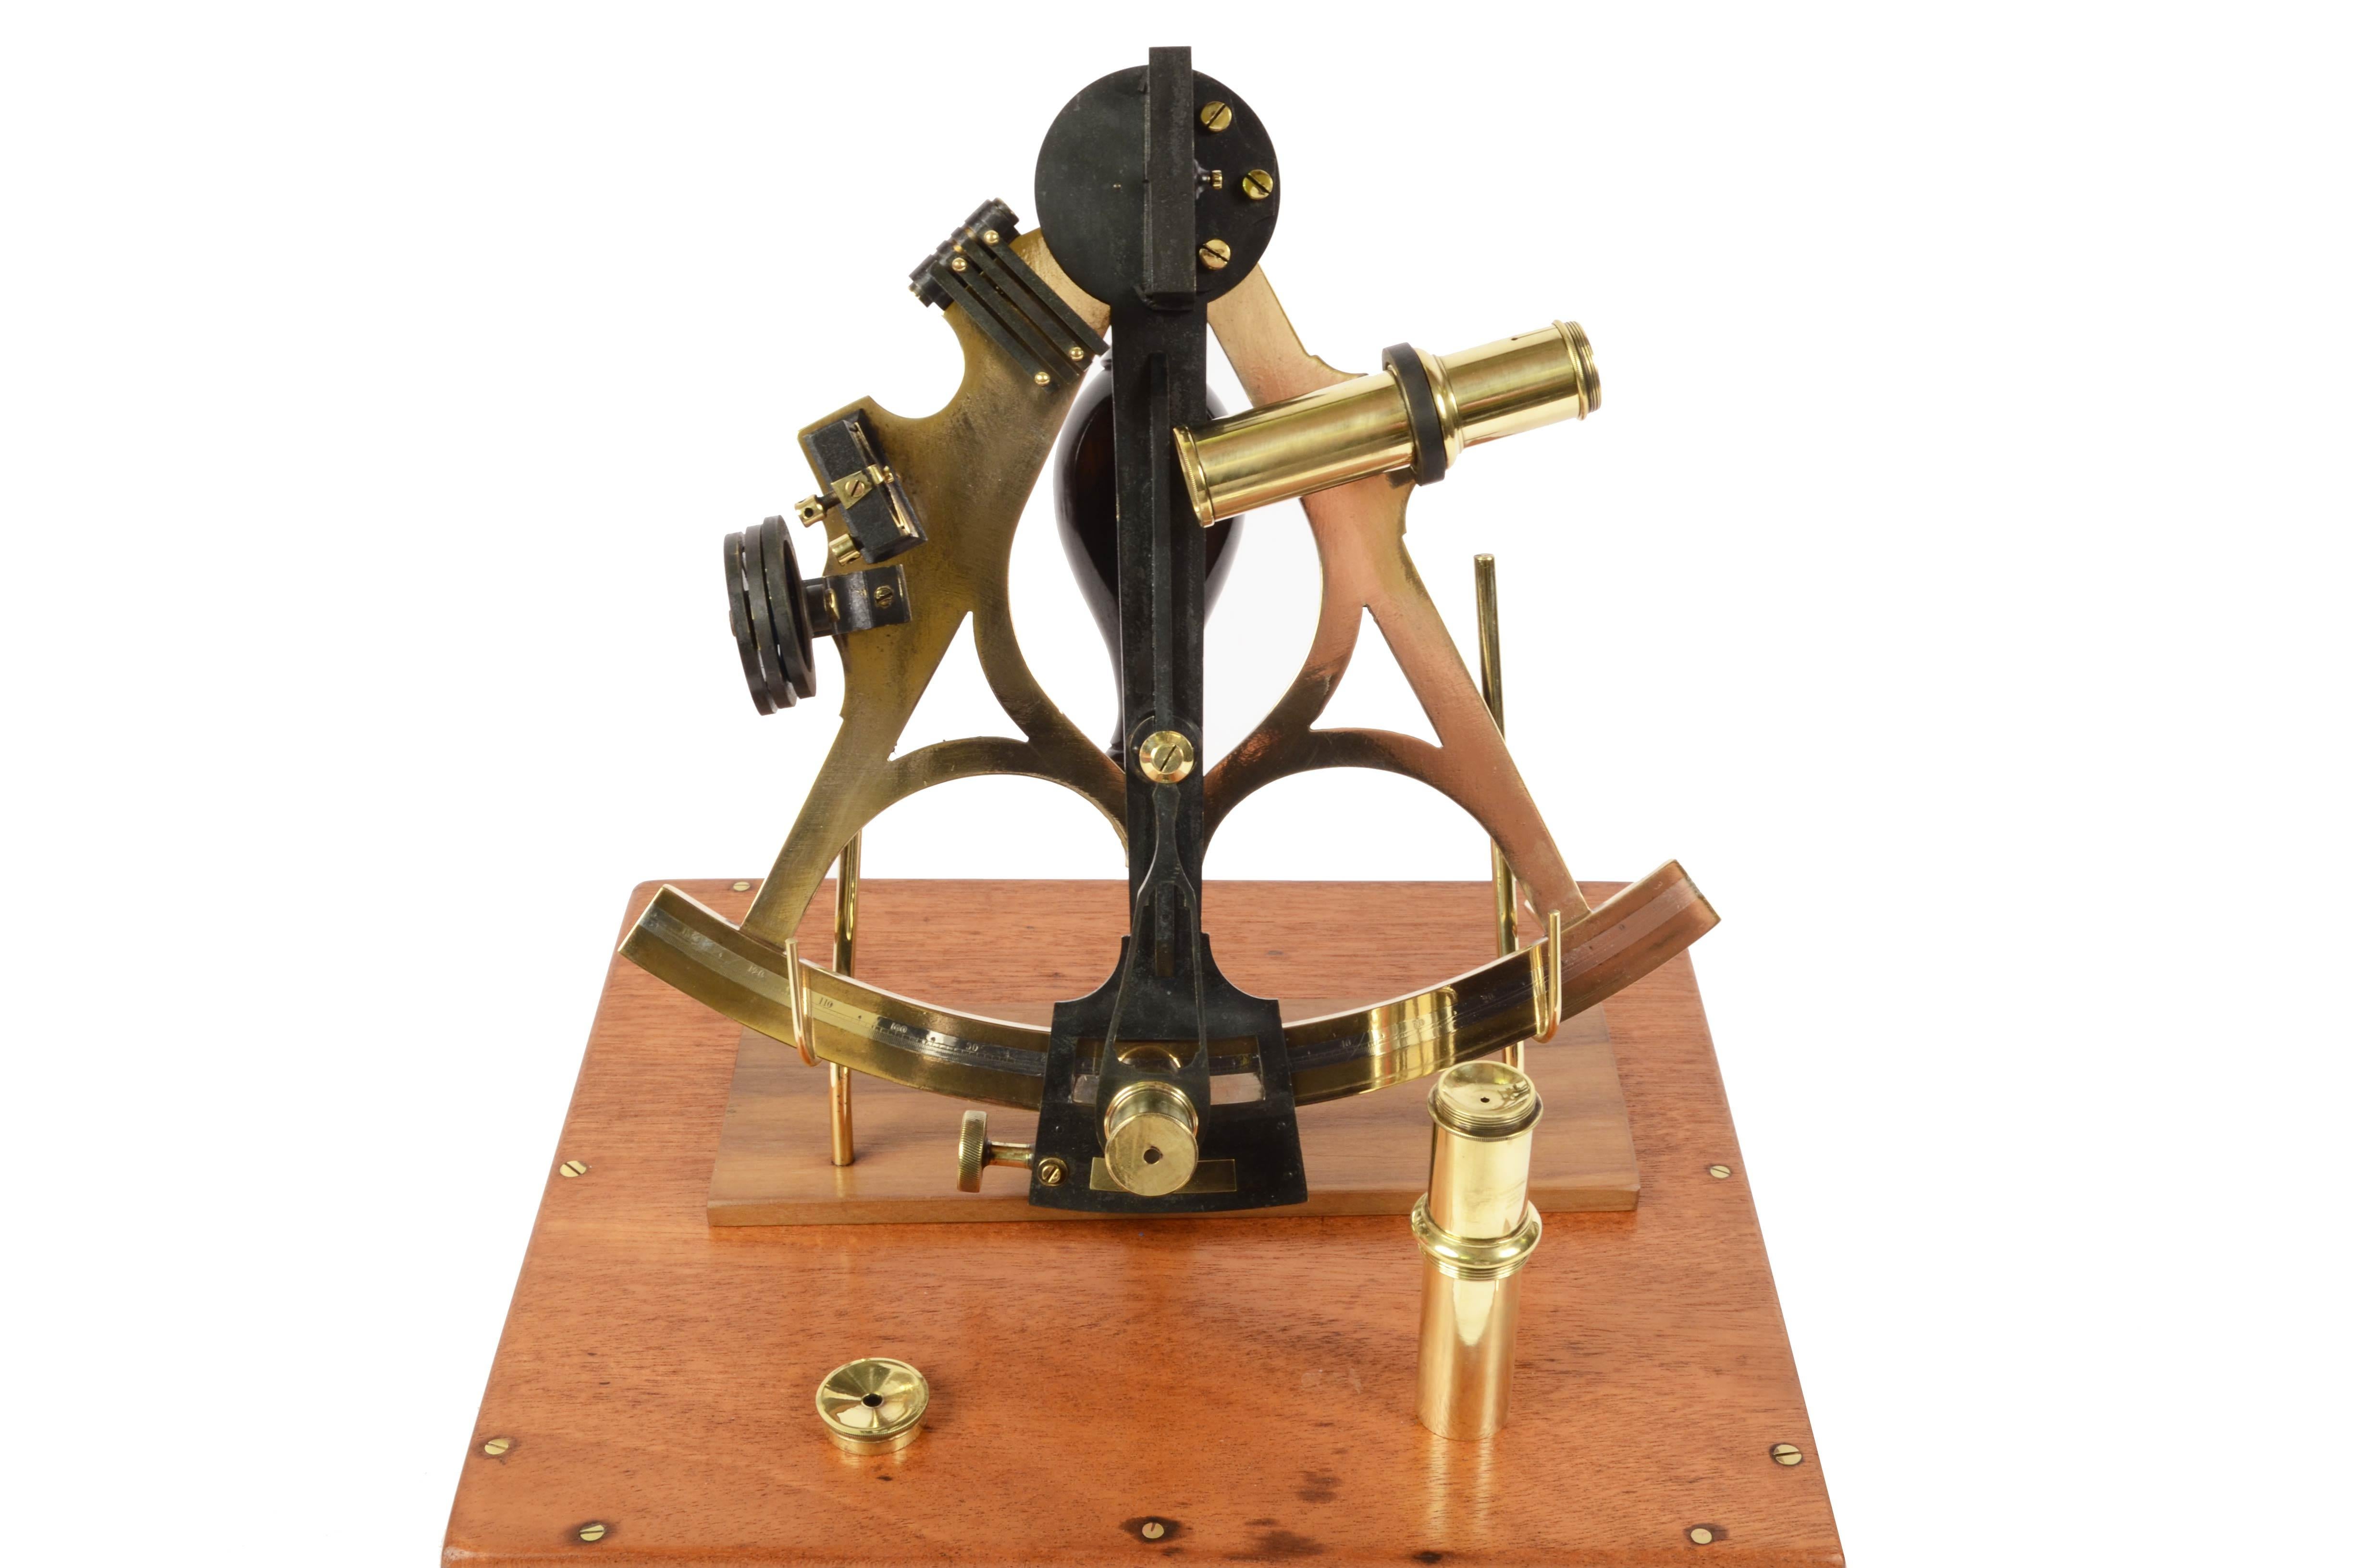 Brass sextant signed Ainsley South Shields (1858-1886) complete with original wood case and lenses. 
Silver vernier, wood handle, 3 colored glasses for the fixed mirror and 4 for the mobile one, two telescopes, a microscope for reading the vernier,